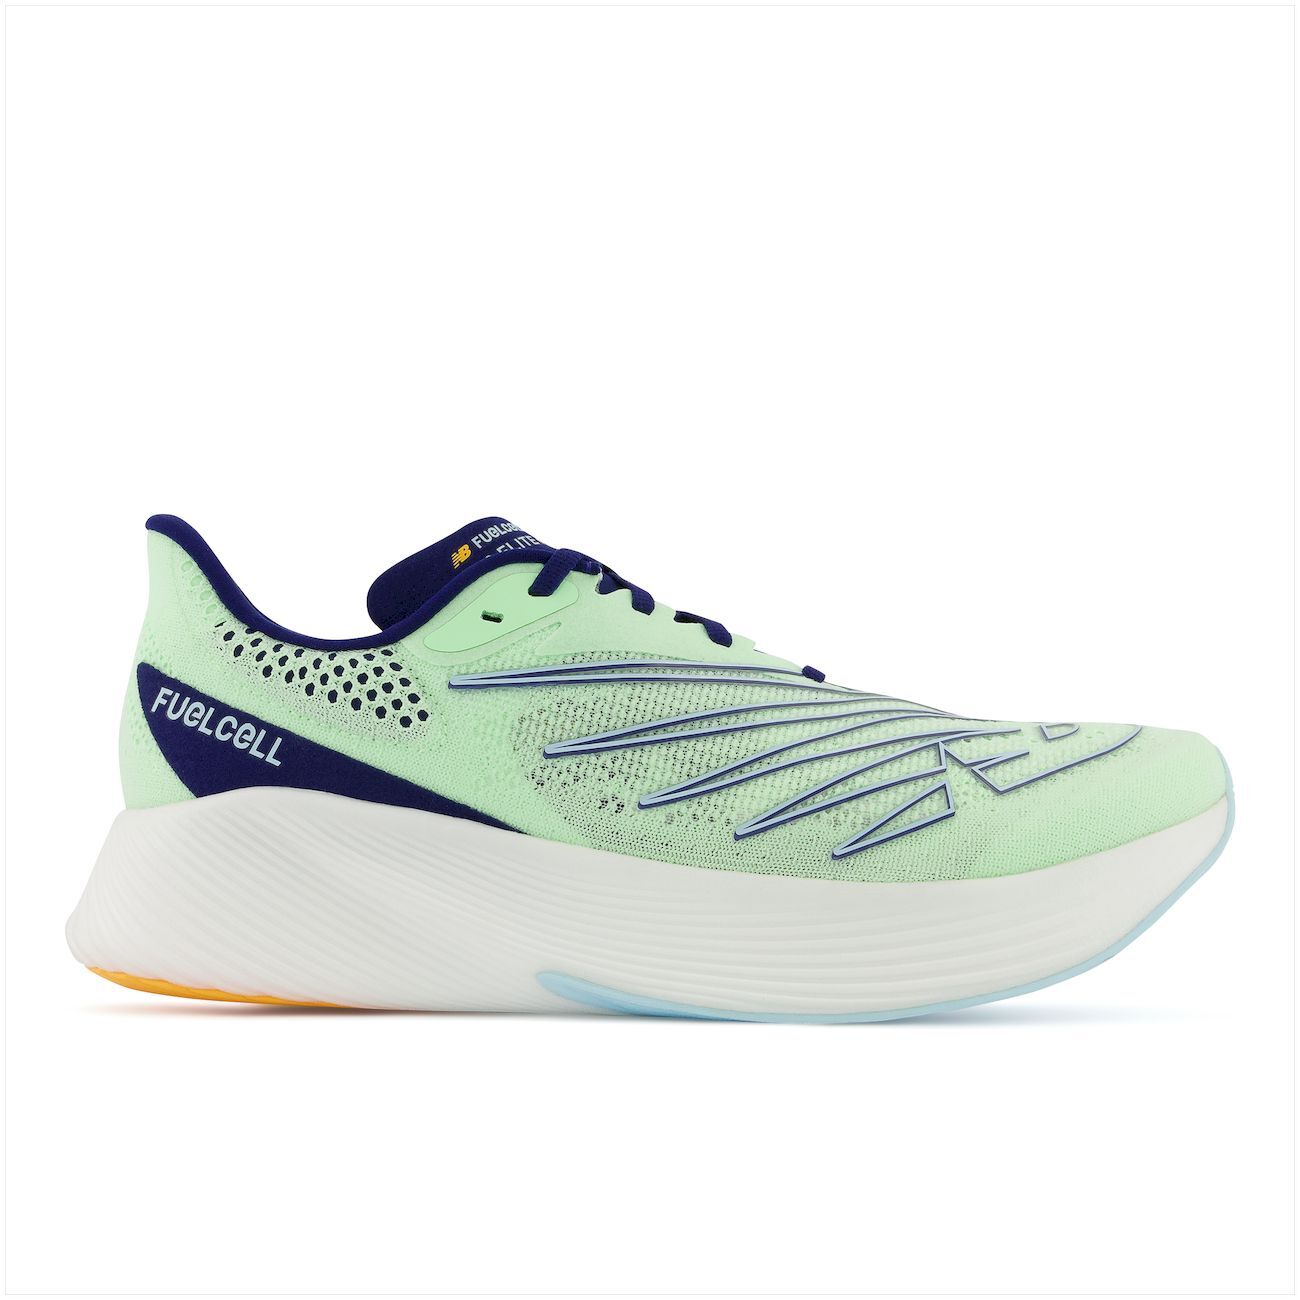 New Balance Fuelcell RC Elite V2 - Running shoes - Men's